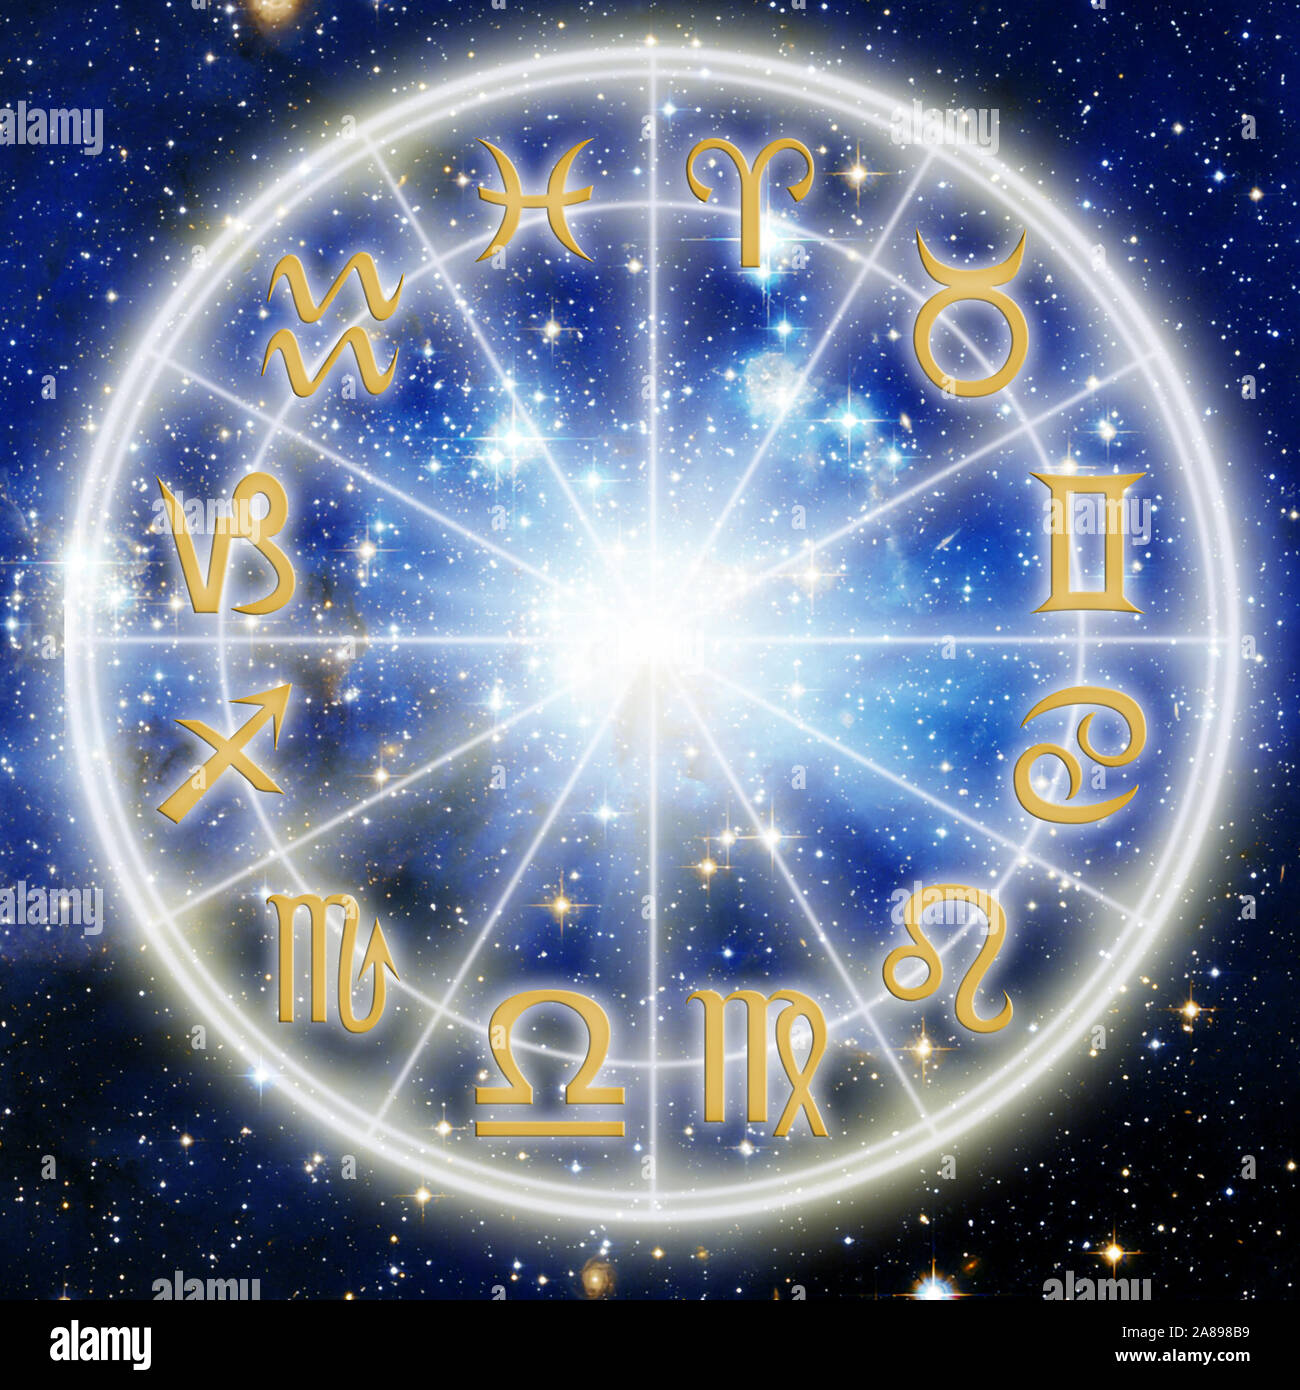 astrology wheel with all the signs of the zodiac Stock Photo